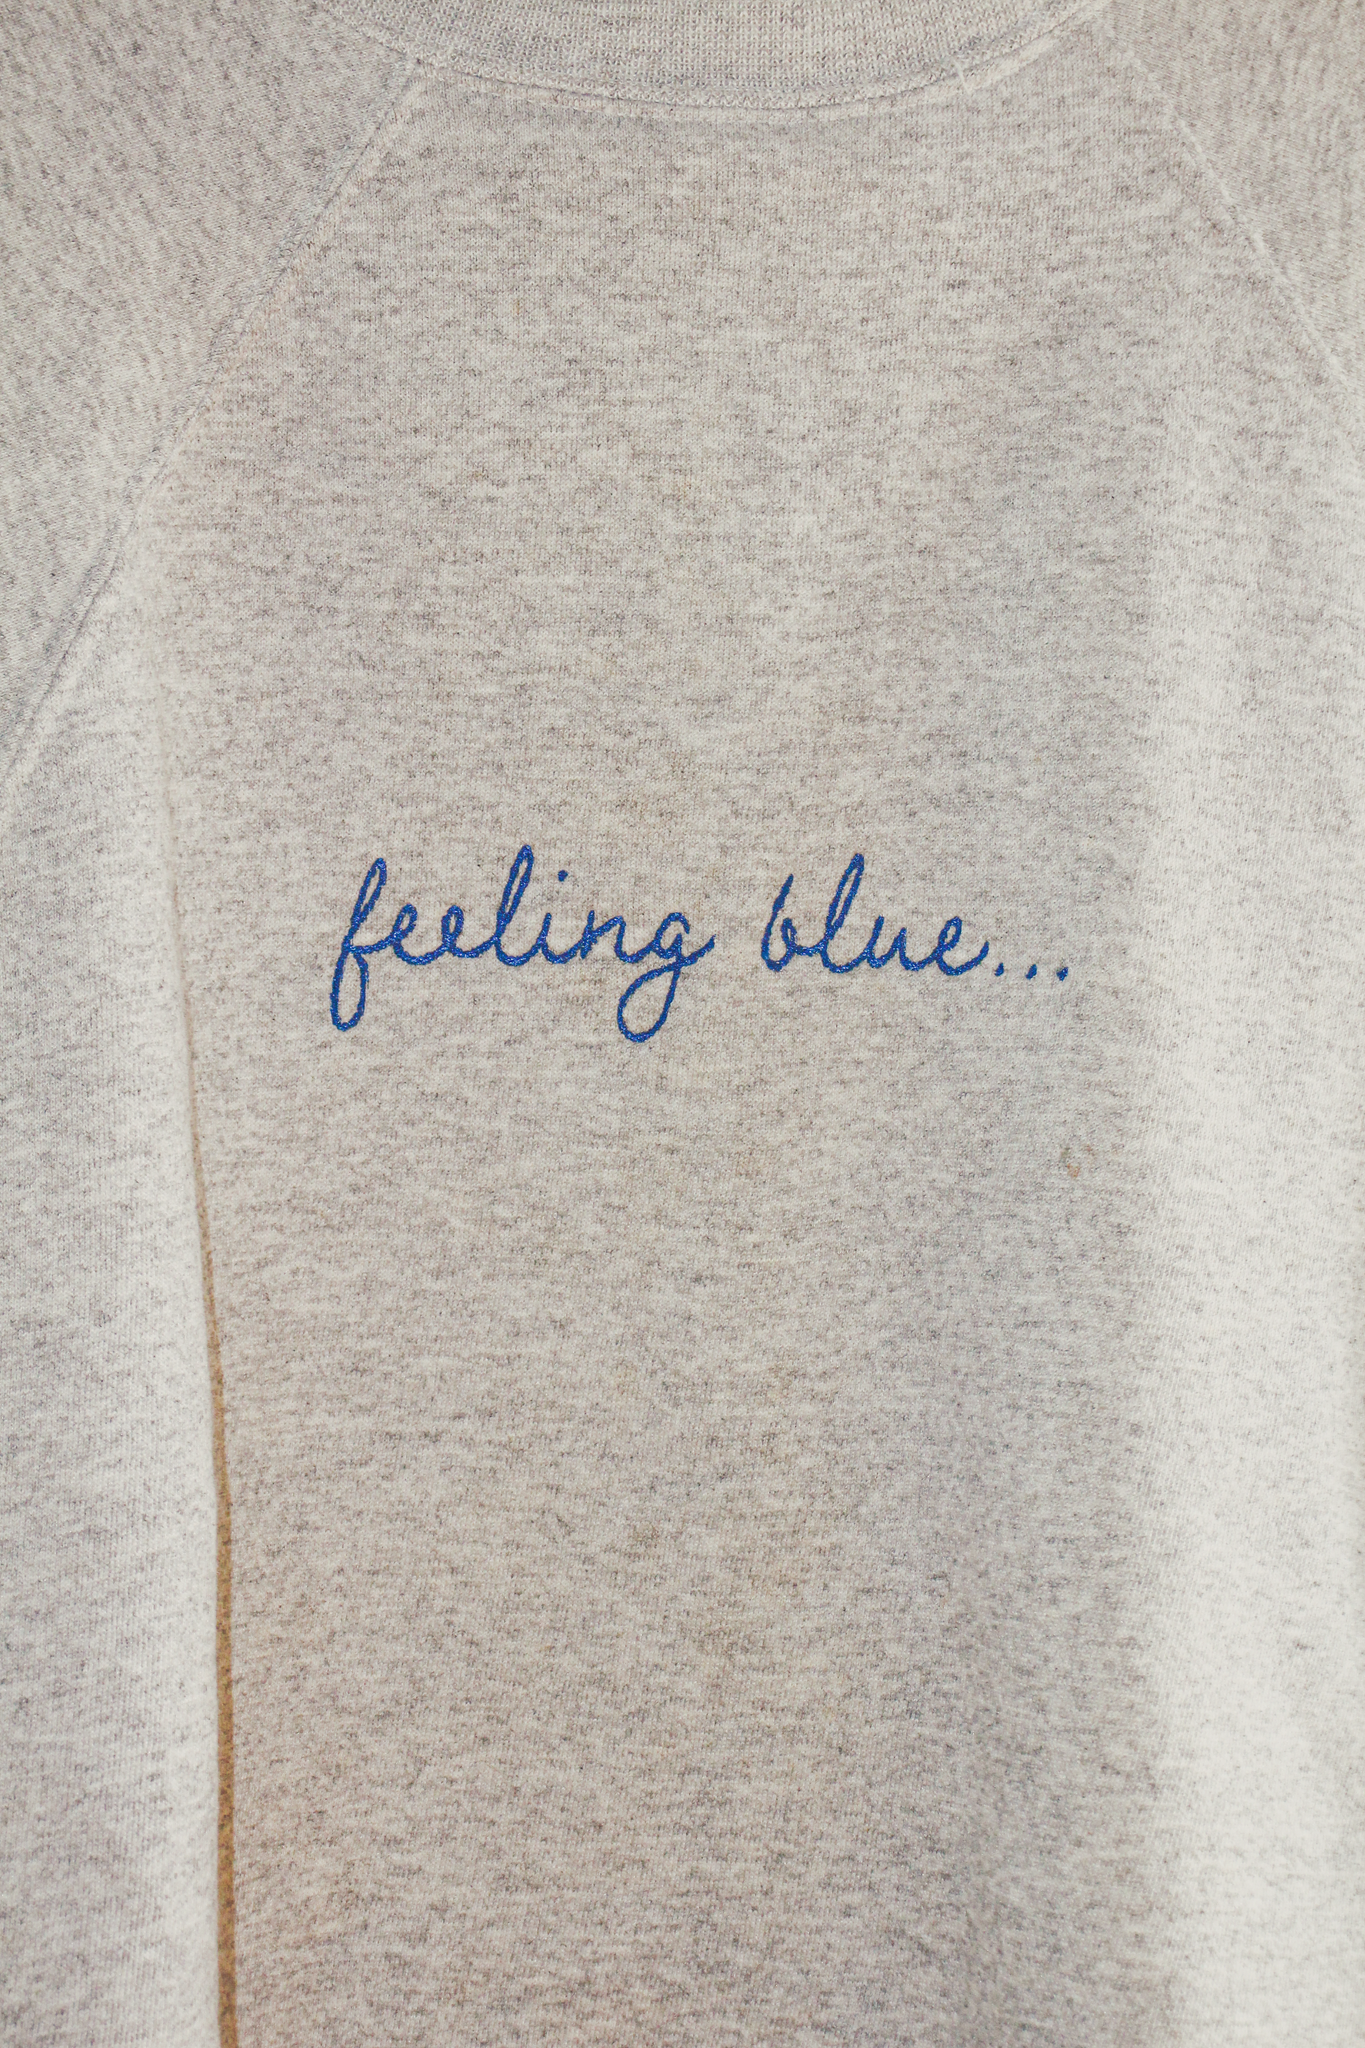 A gray sweatshirt with blue embroidered text on it that reads "feeling blue..."